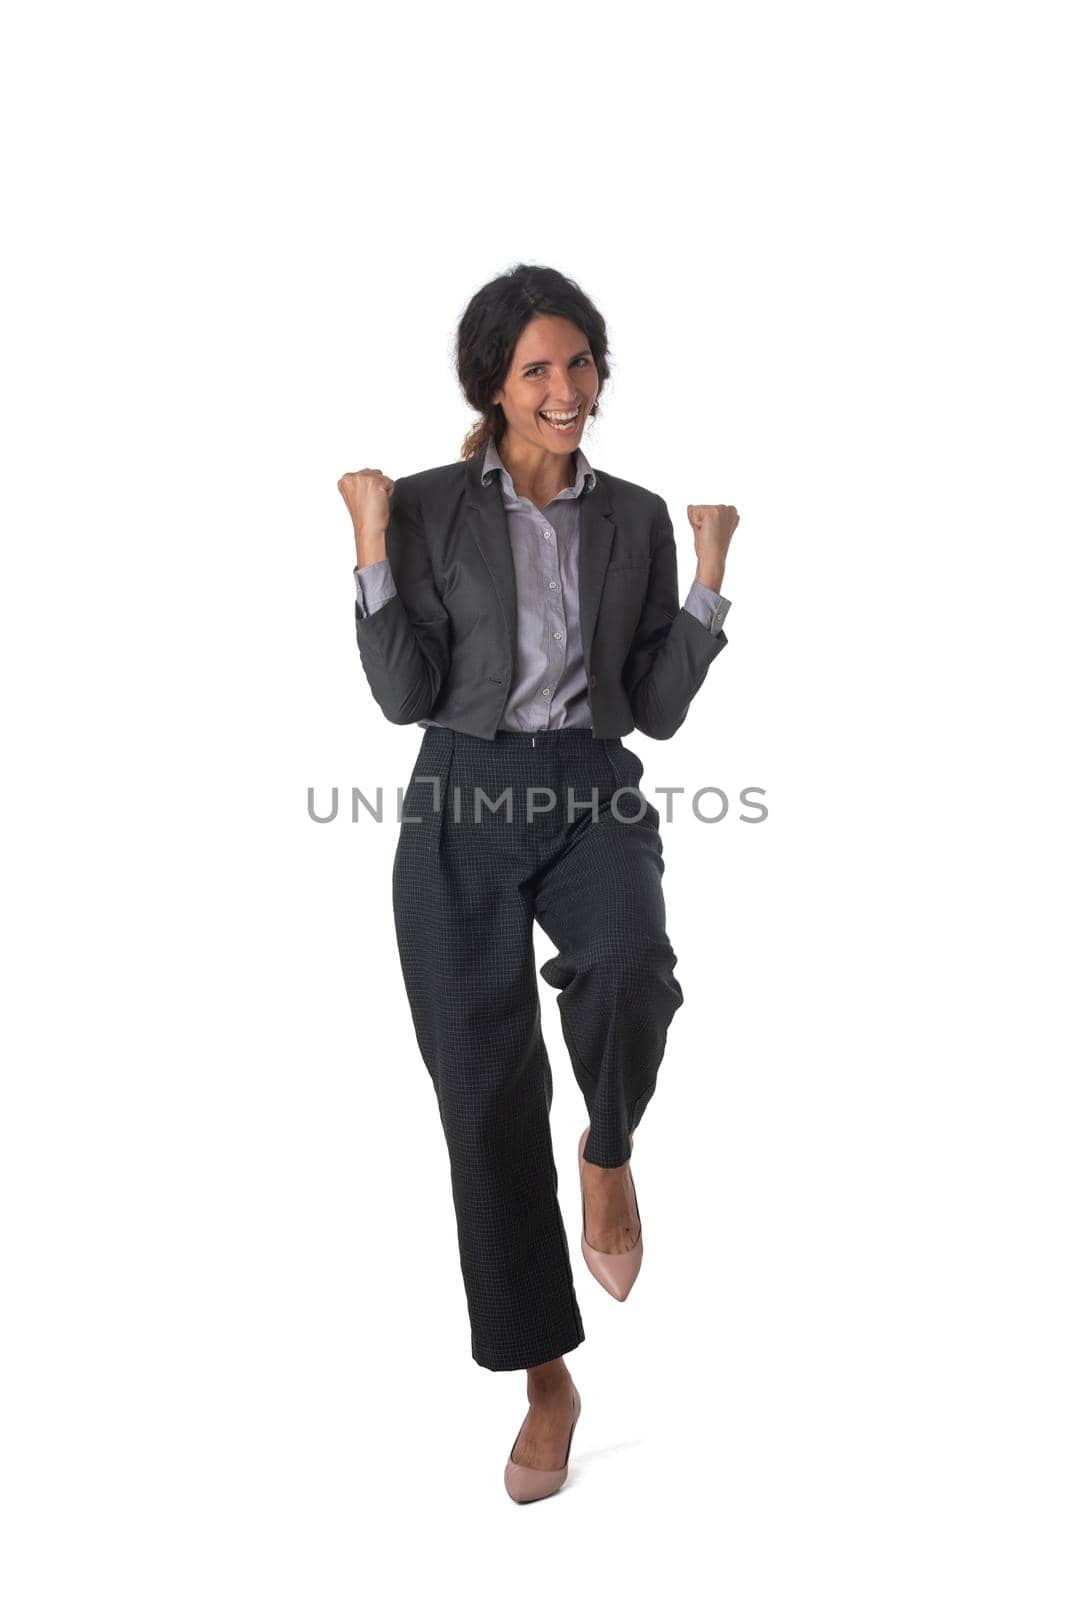 Full length portrait of young successful executive very excited, happy smiling business woman holding fists yes gesture, isolated on white background